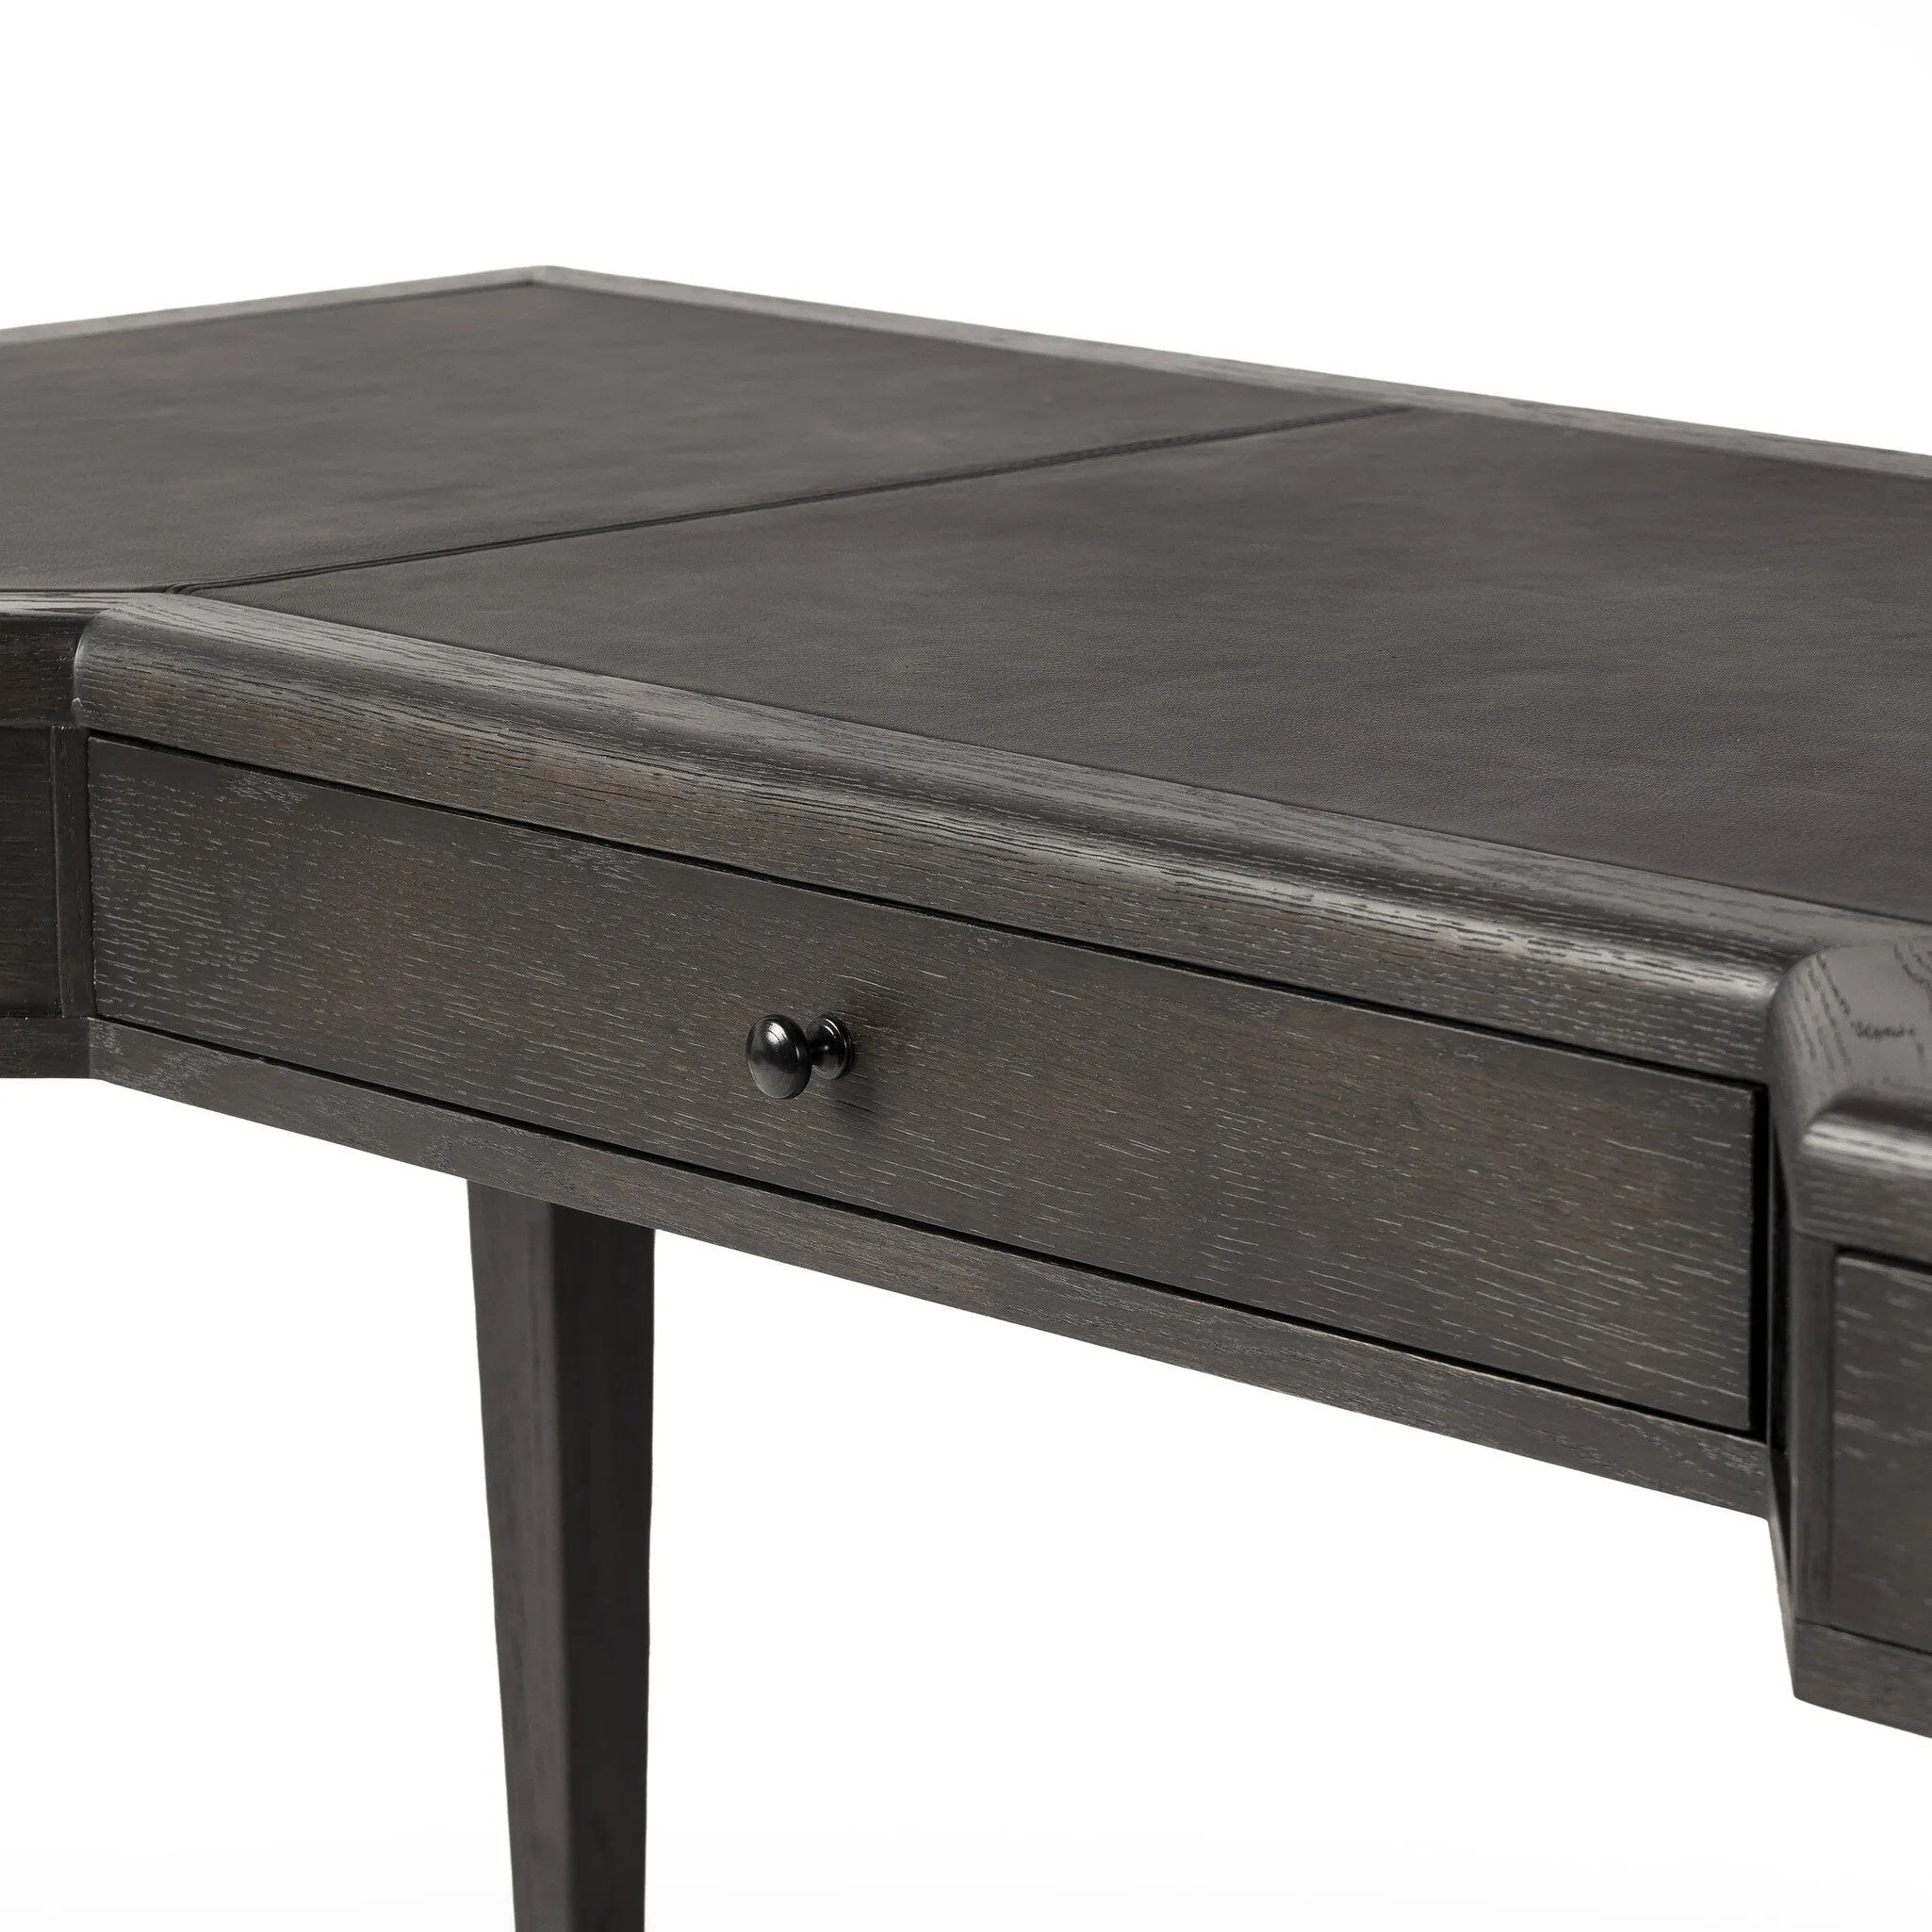 This refreshed directoire-style desk pairs a 100% top-grain leather inset top with a unique reverse breakfront and recessed center drawer. Finished in distressed black oak, it offers the workspace a classic yet updated feel.Collection: Allsto Amethyst Home provides interior design, new home construction design consulting, vintage area rugs, and lighting in the Charlotte metro area.